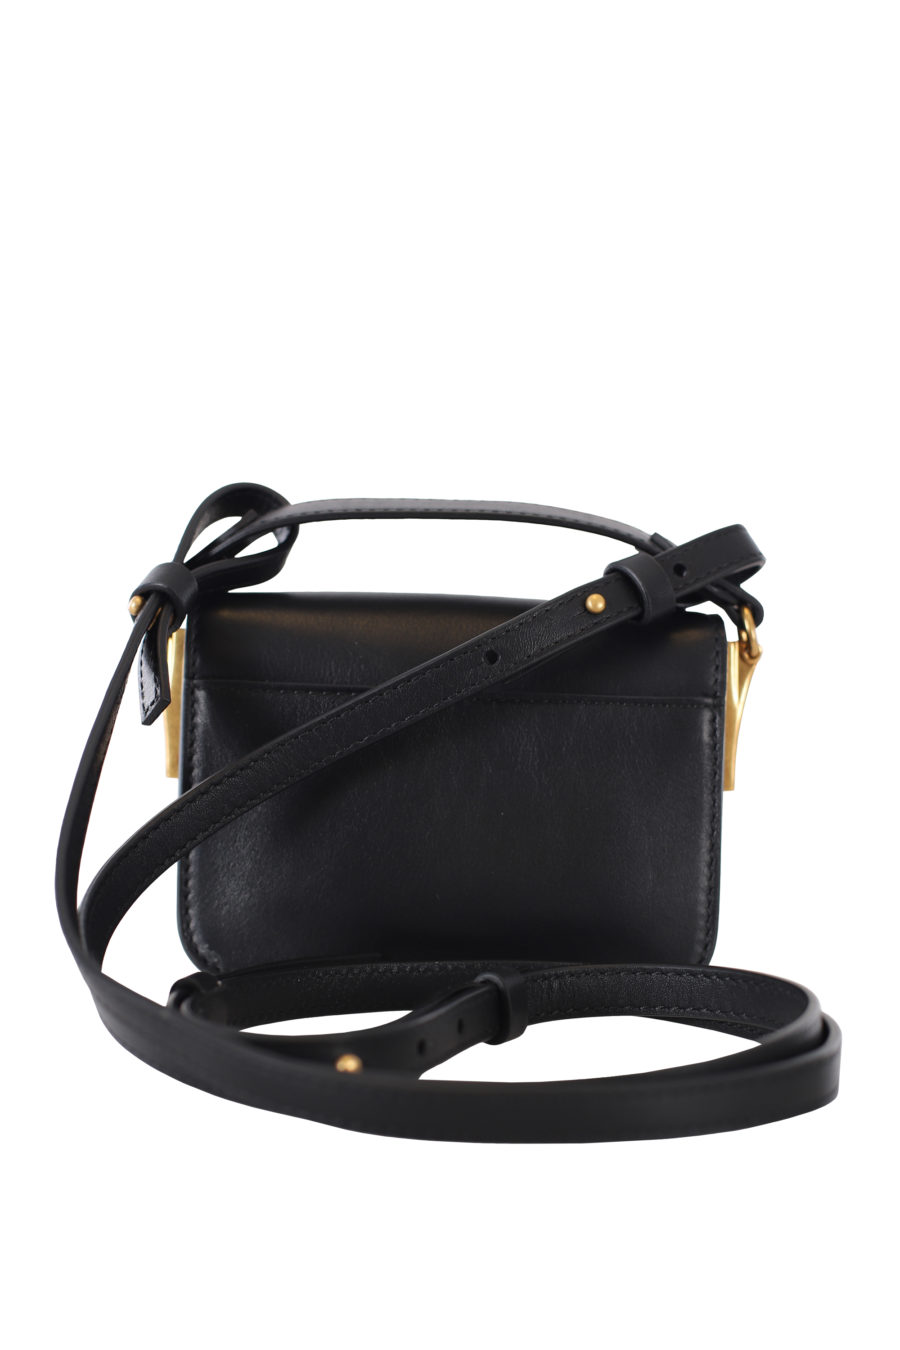 Black crossbody bag with gold detail - IMG 9383